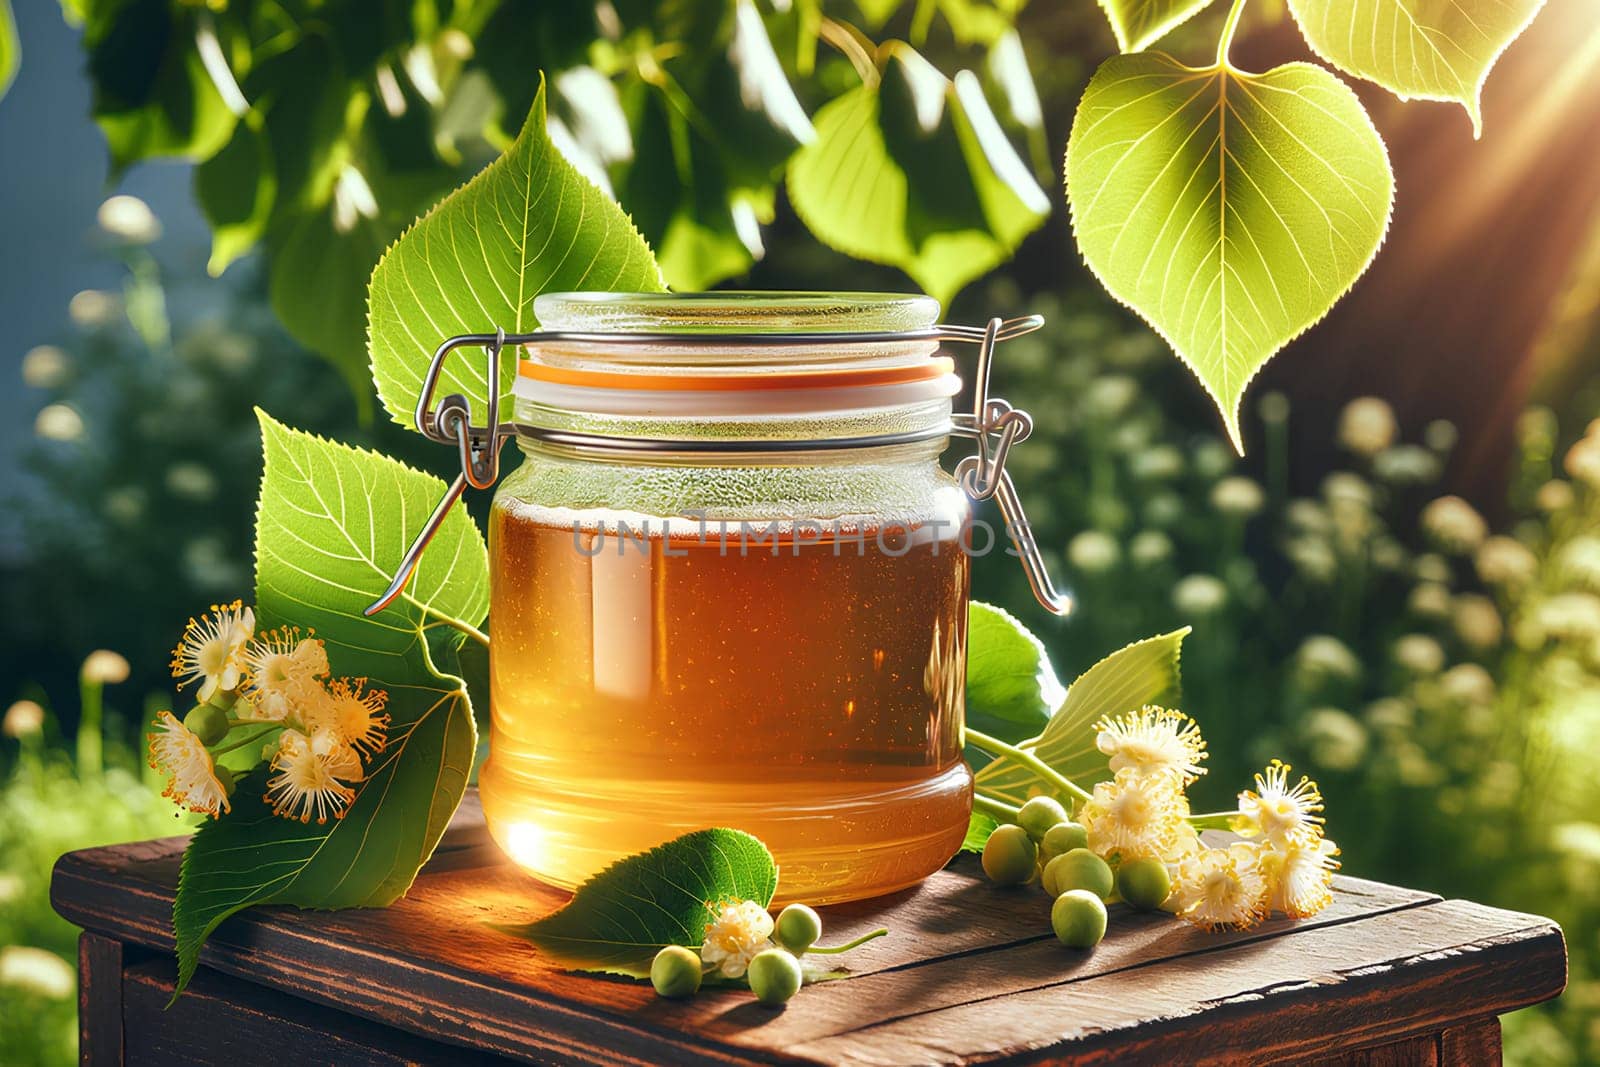 A glass jar of linden honey on a wooden table under a blooming linden tree in the garden on sunny day